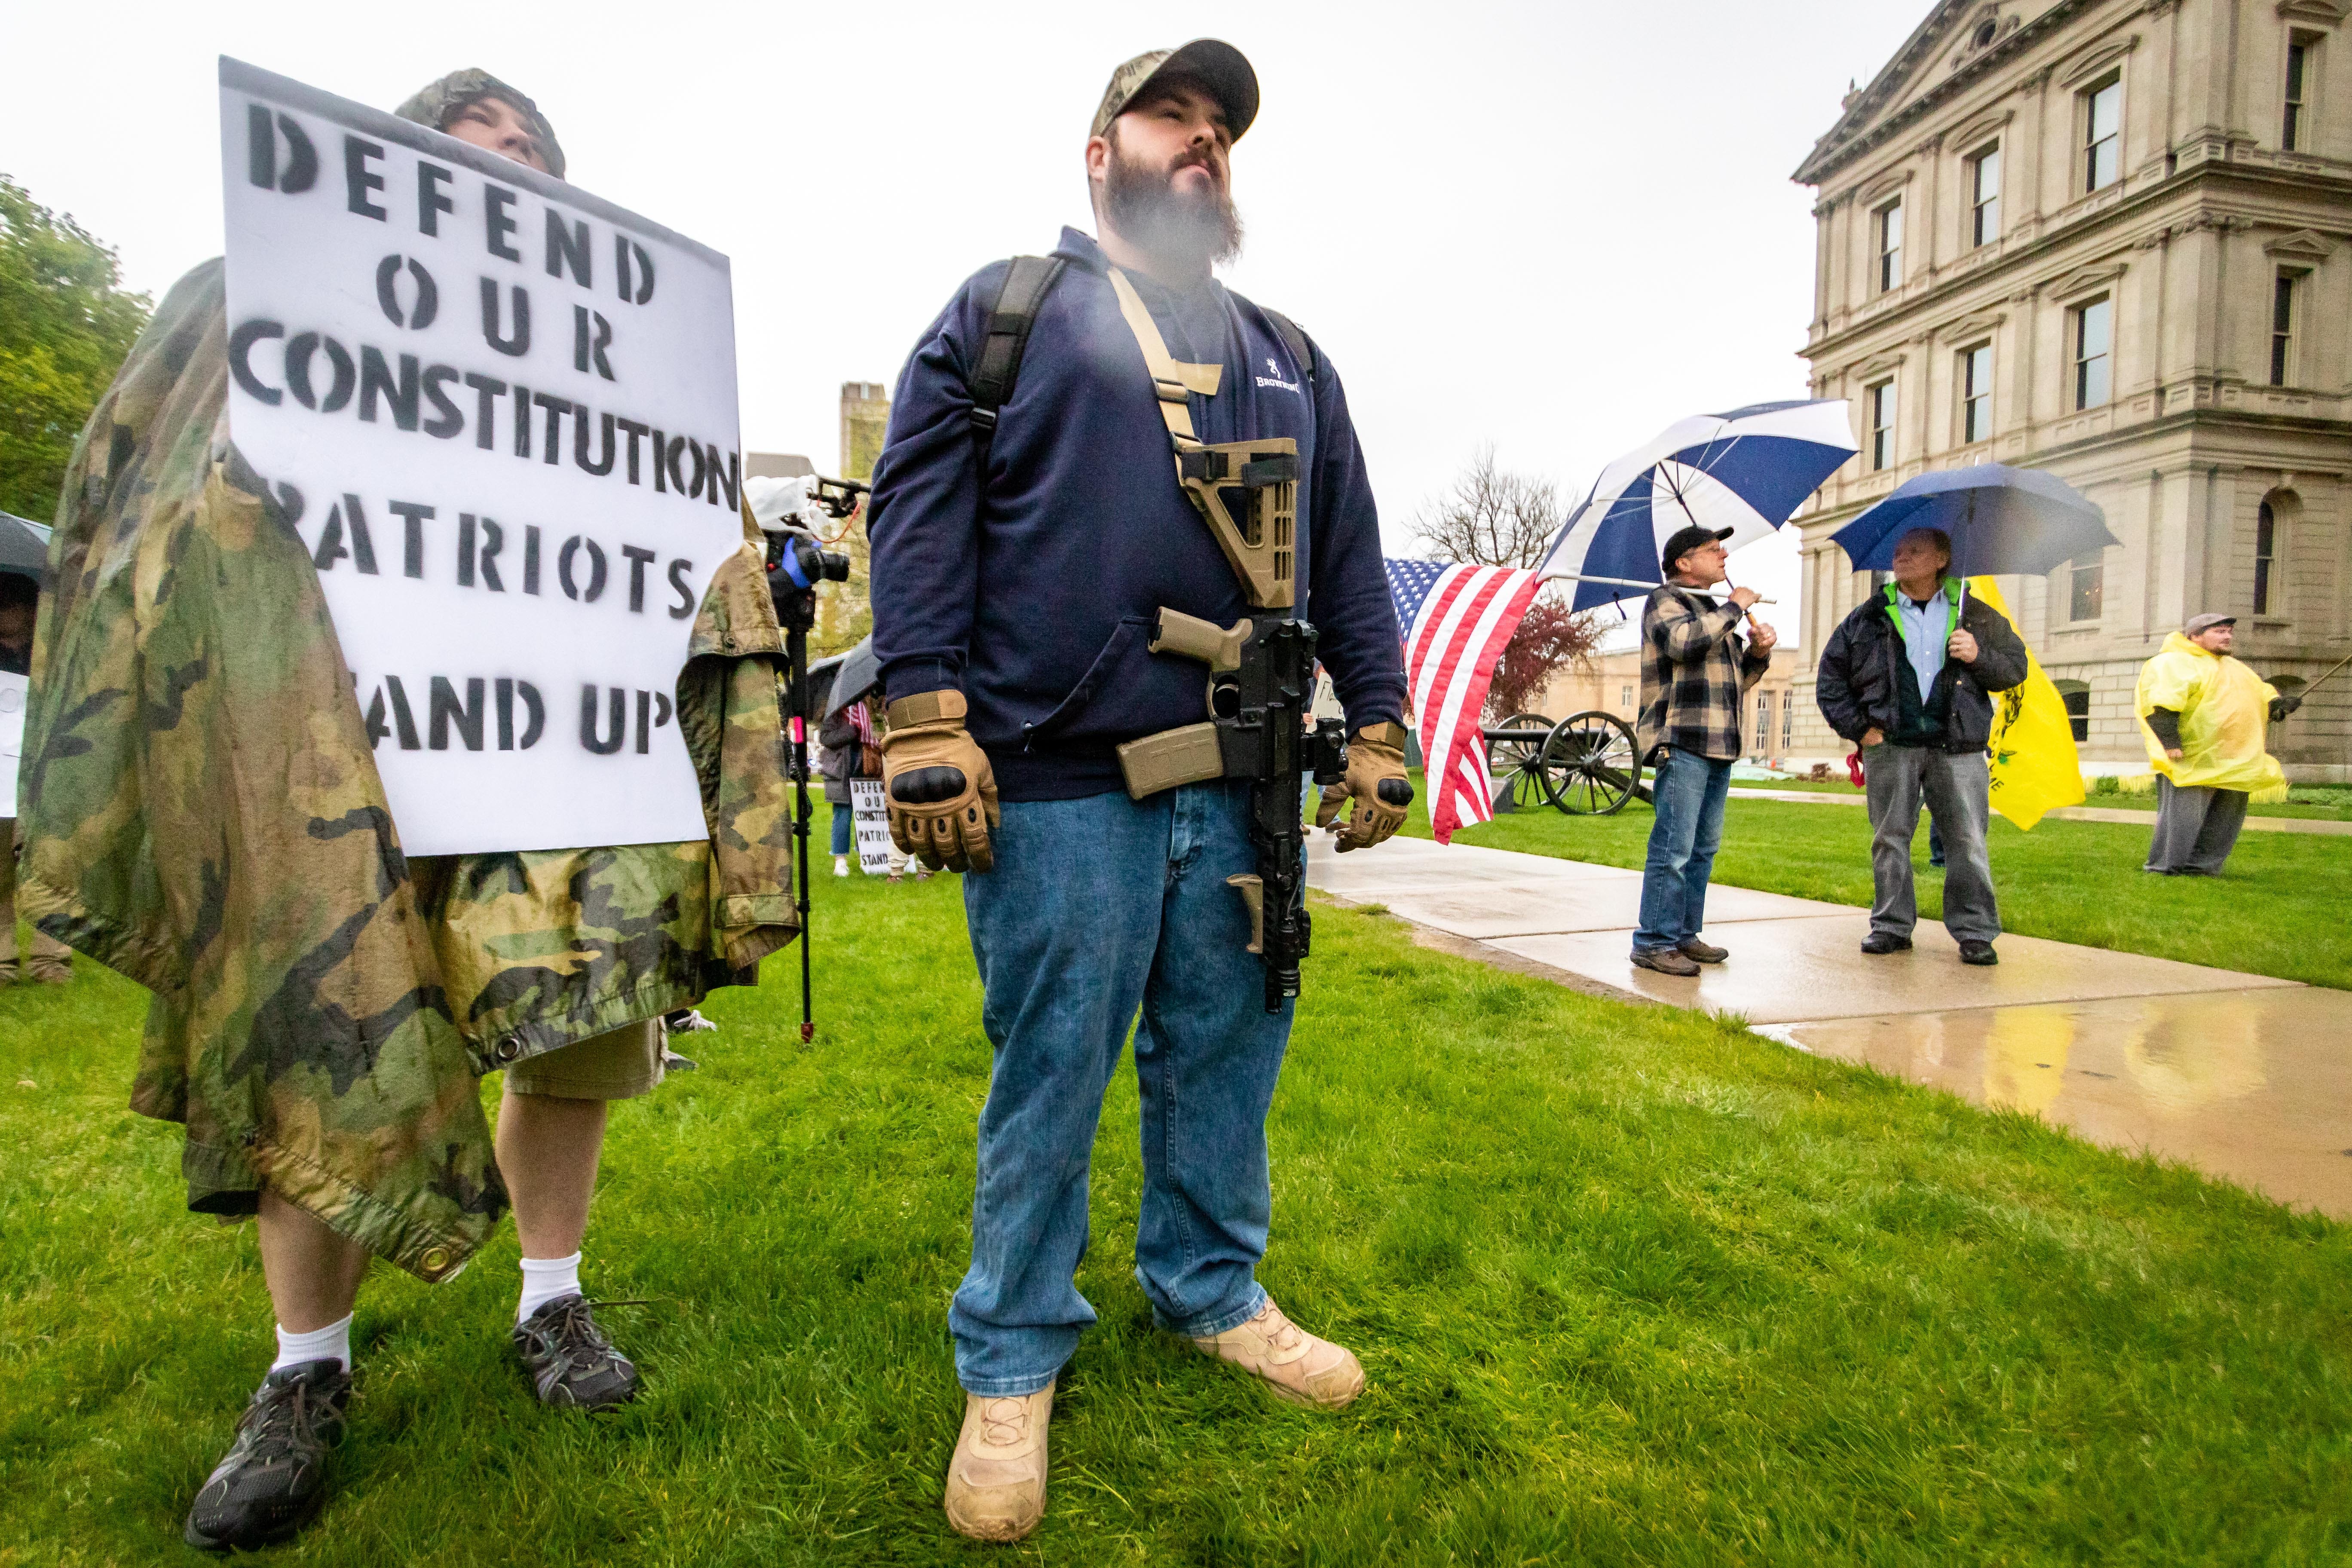 Mike Spohn of Detroit stands on the capital lawn with an large gun strapped to his body during the protest